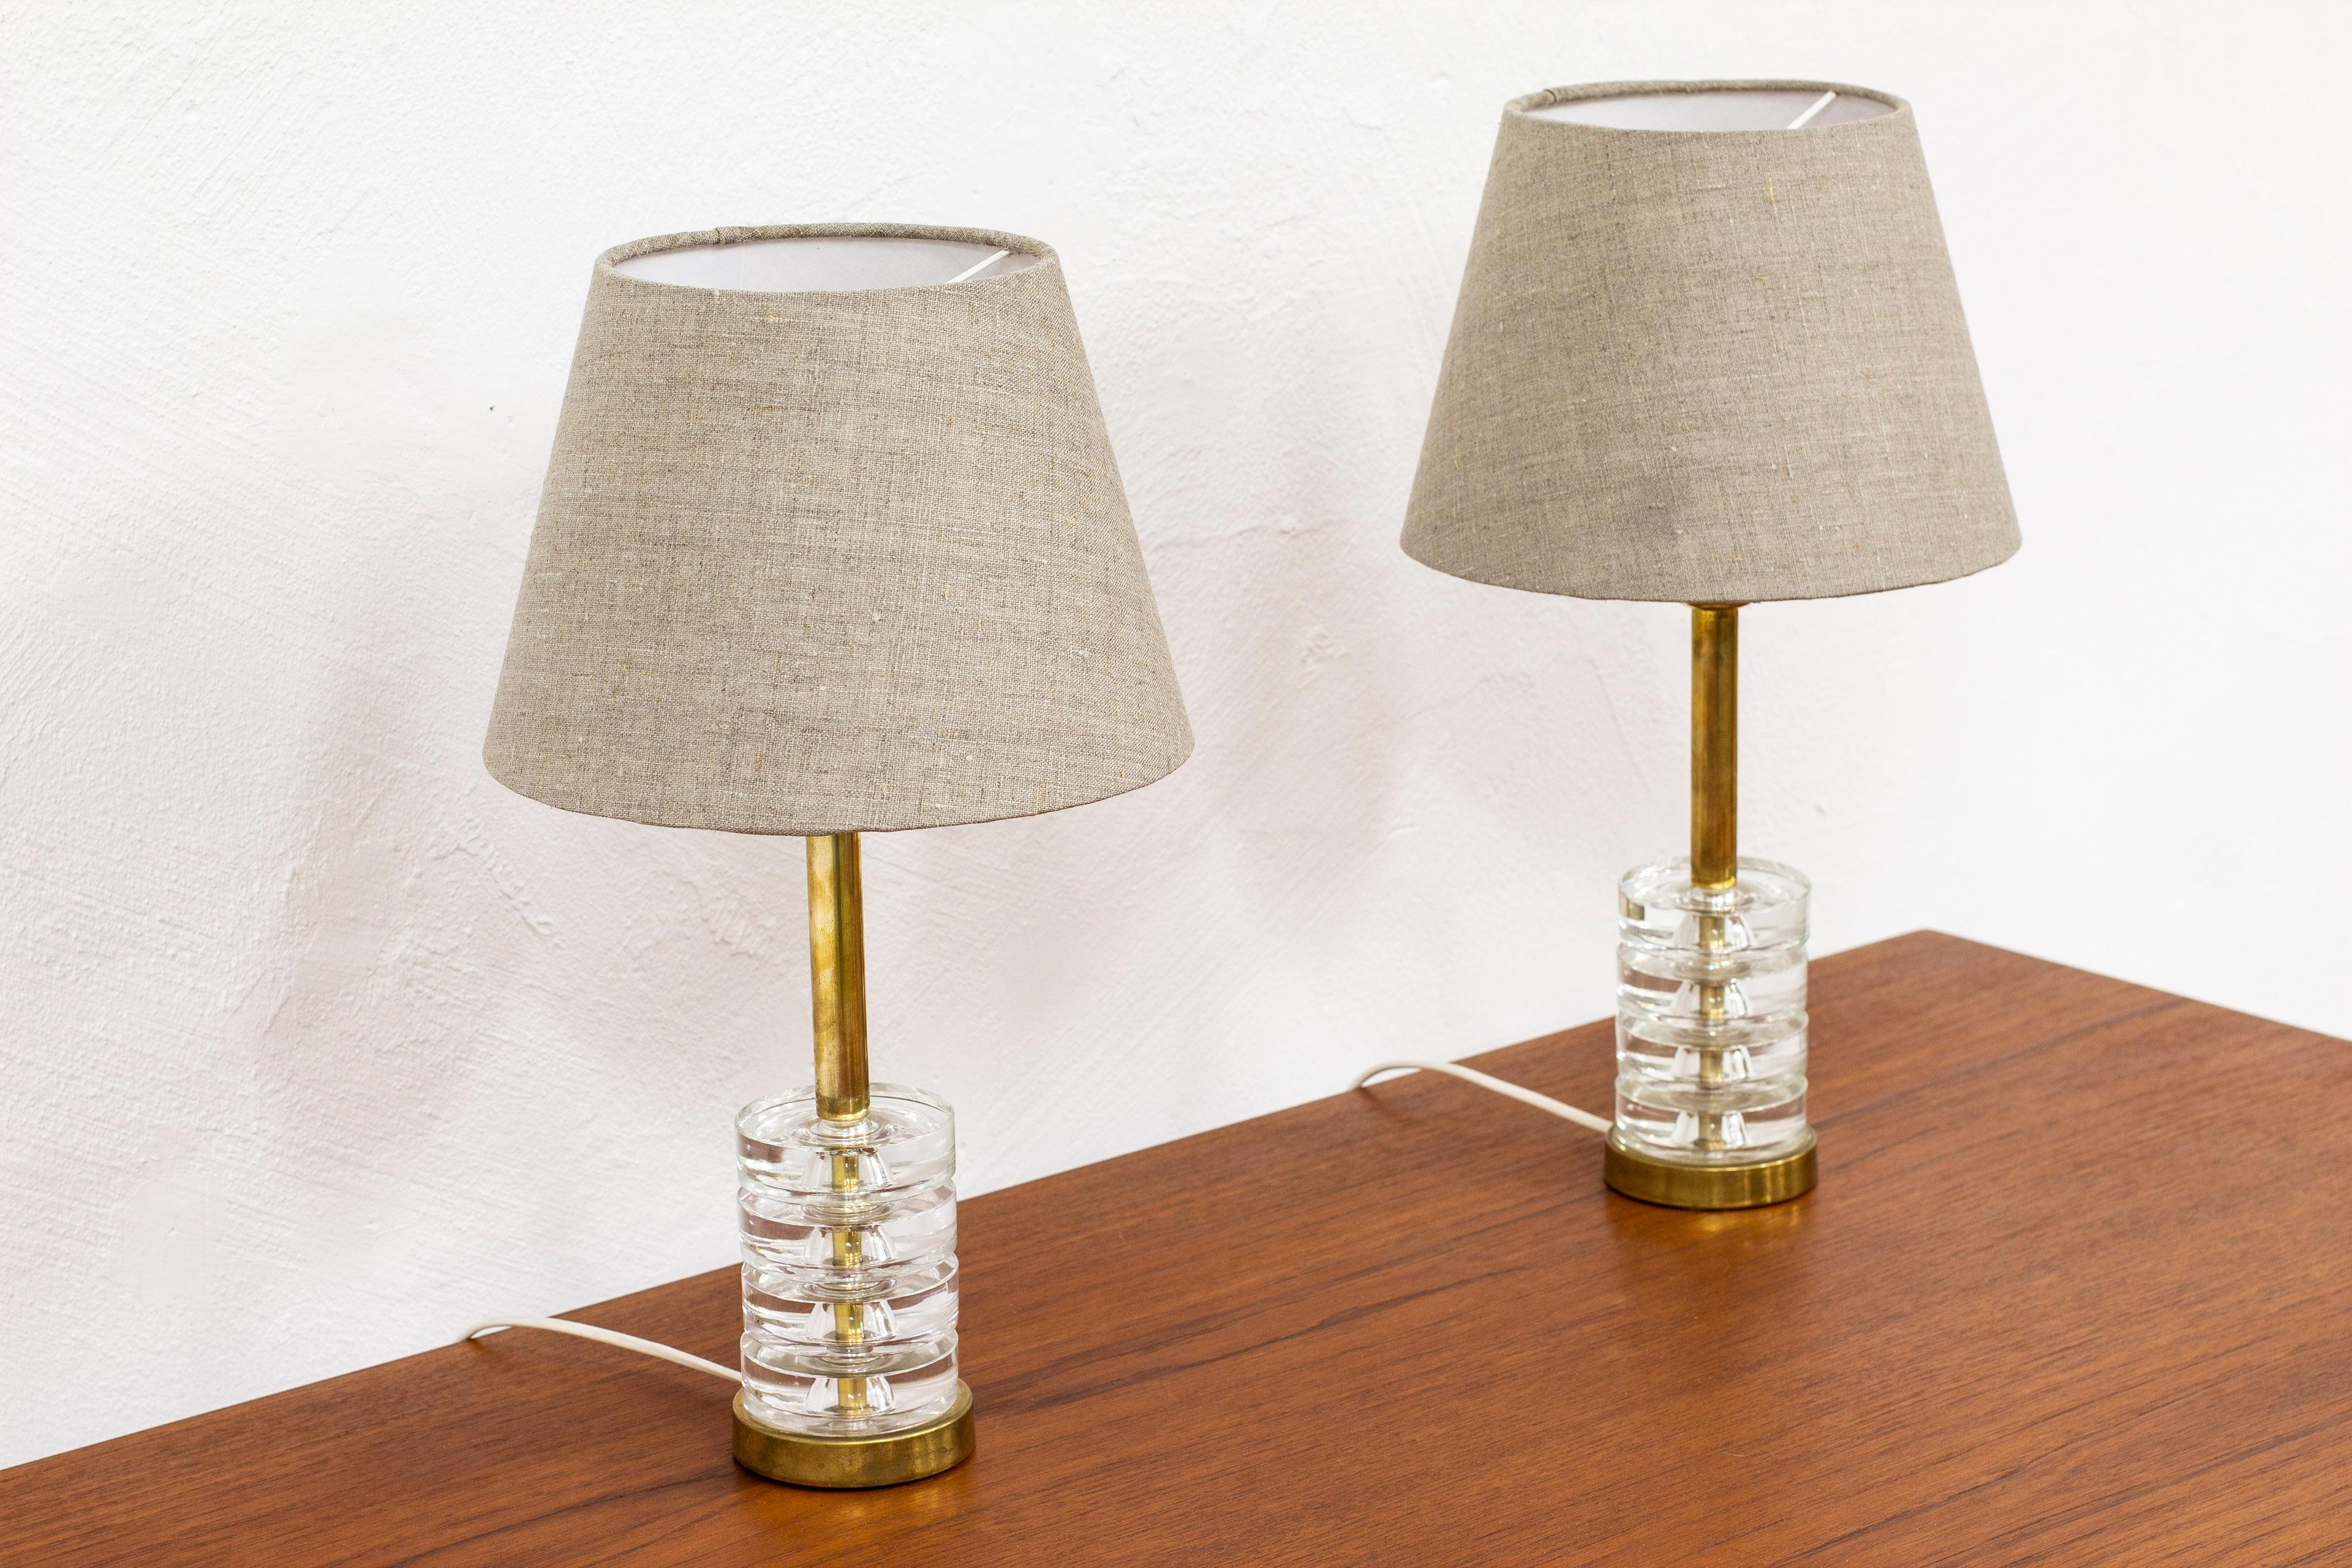 Pair of table lamps model RD 1981 designed by Carl Fagerlund. Produced in Sweden by Orrefors during the 1950s. Made from brass and several thick clear glass discs. Light switches on the lamp holder in working order. very good vintage condition with